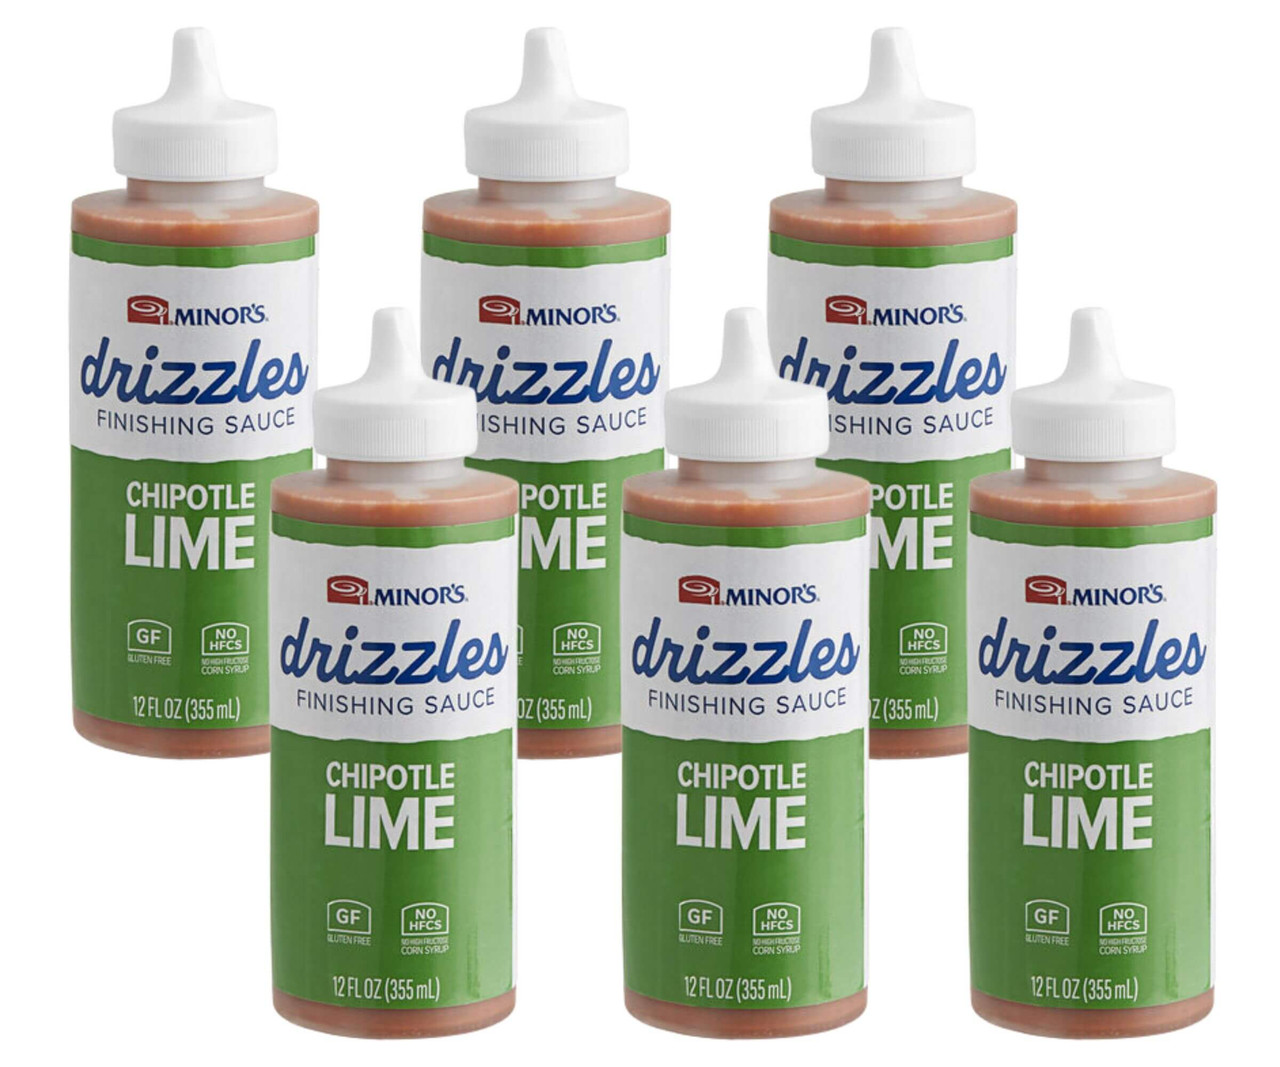 Minor's Drizzles Chipotle Lime Finishing Sauce 12 oz. 6/Case-Chicken Pieces